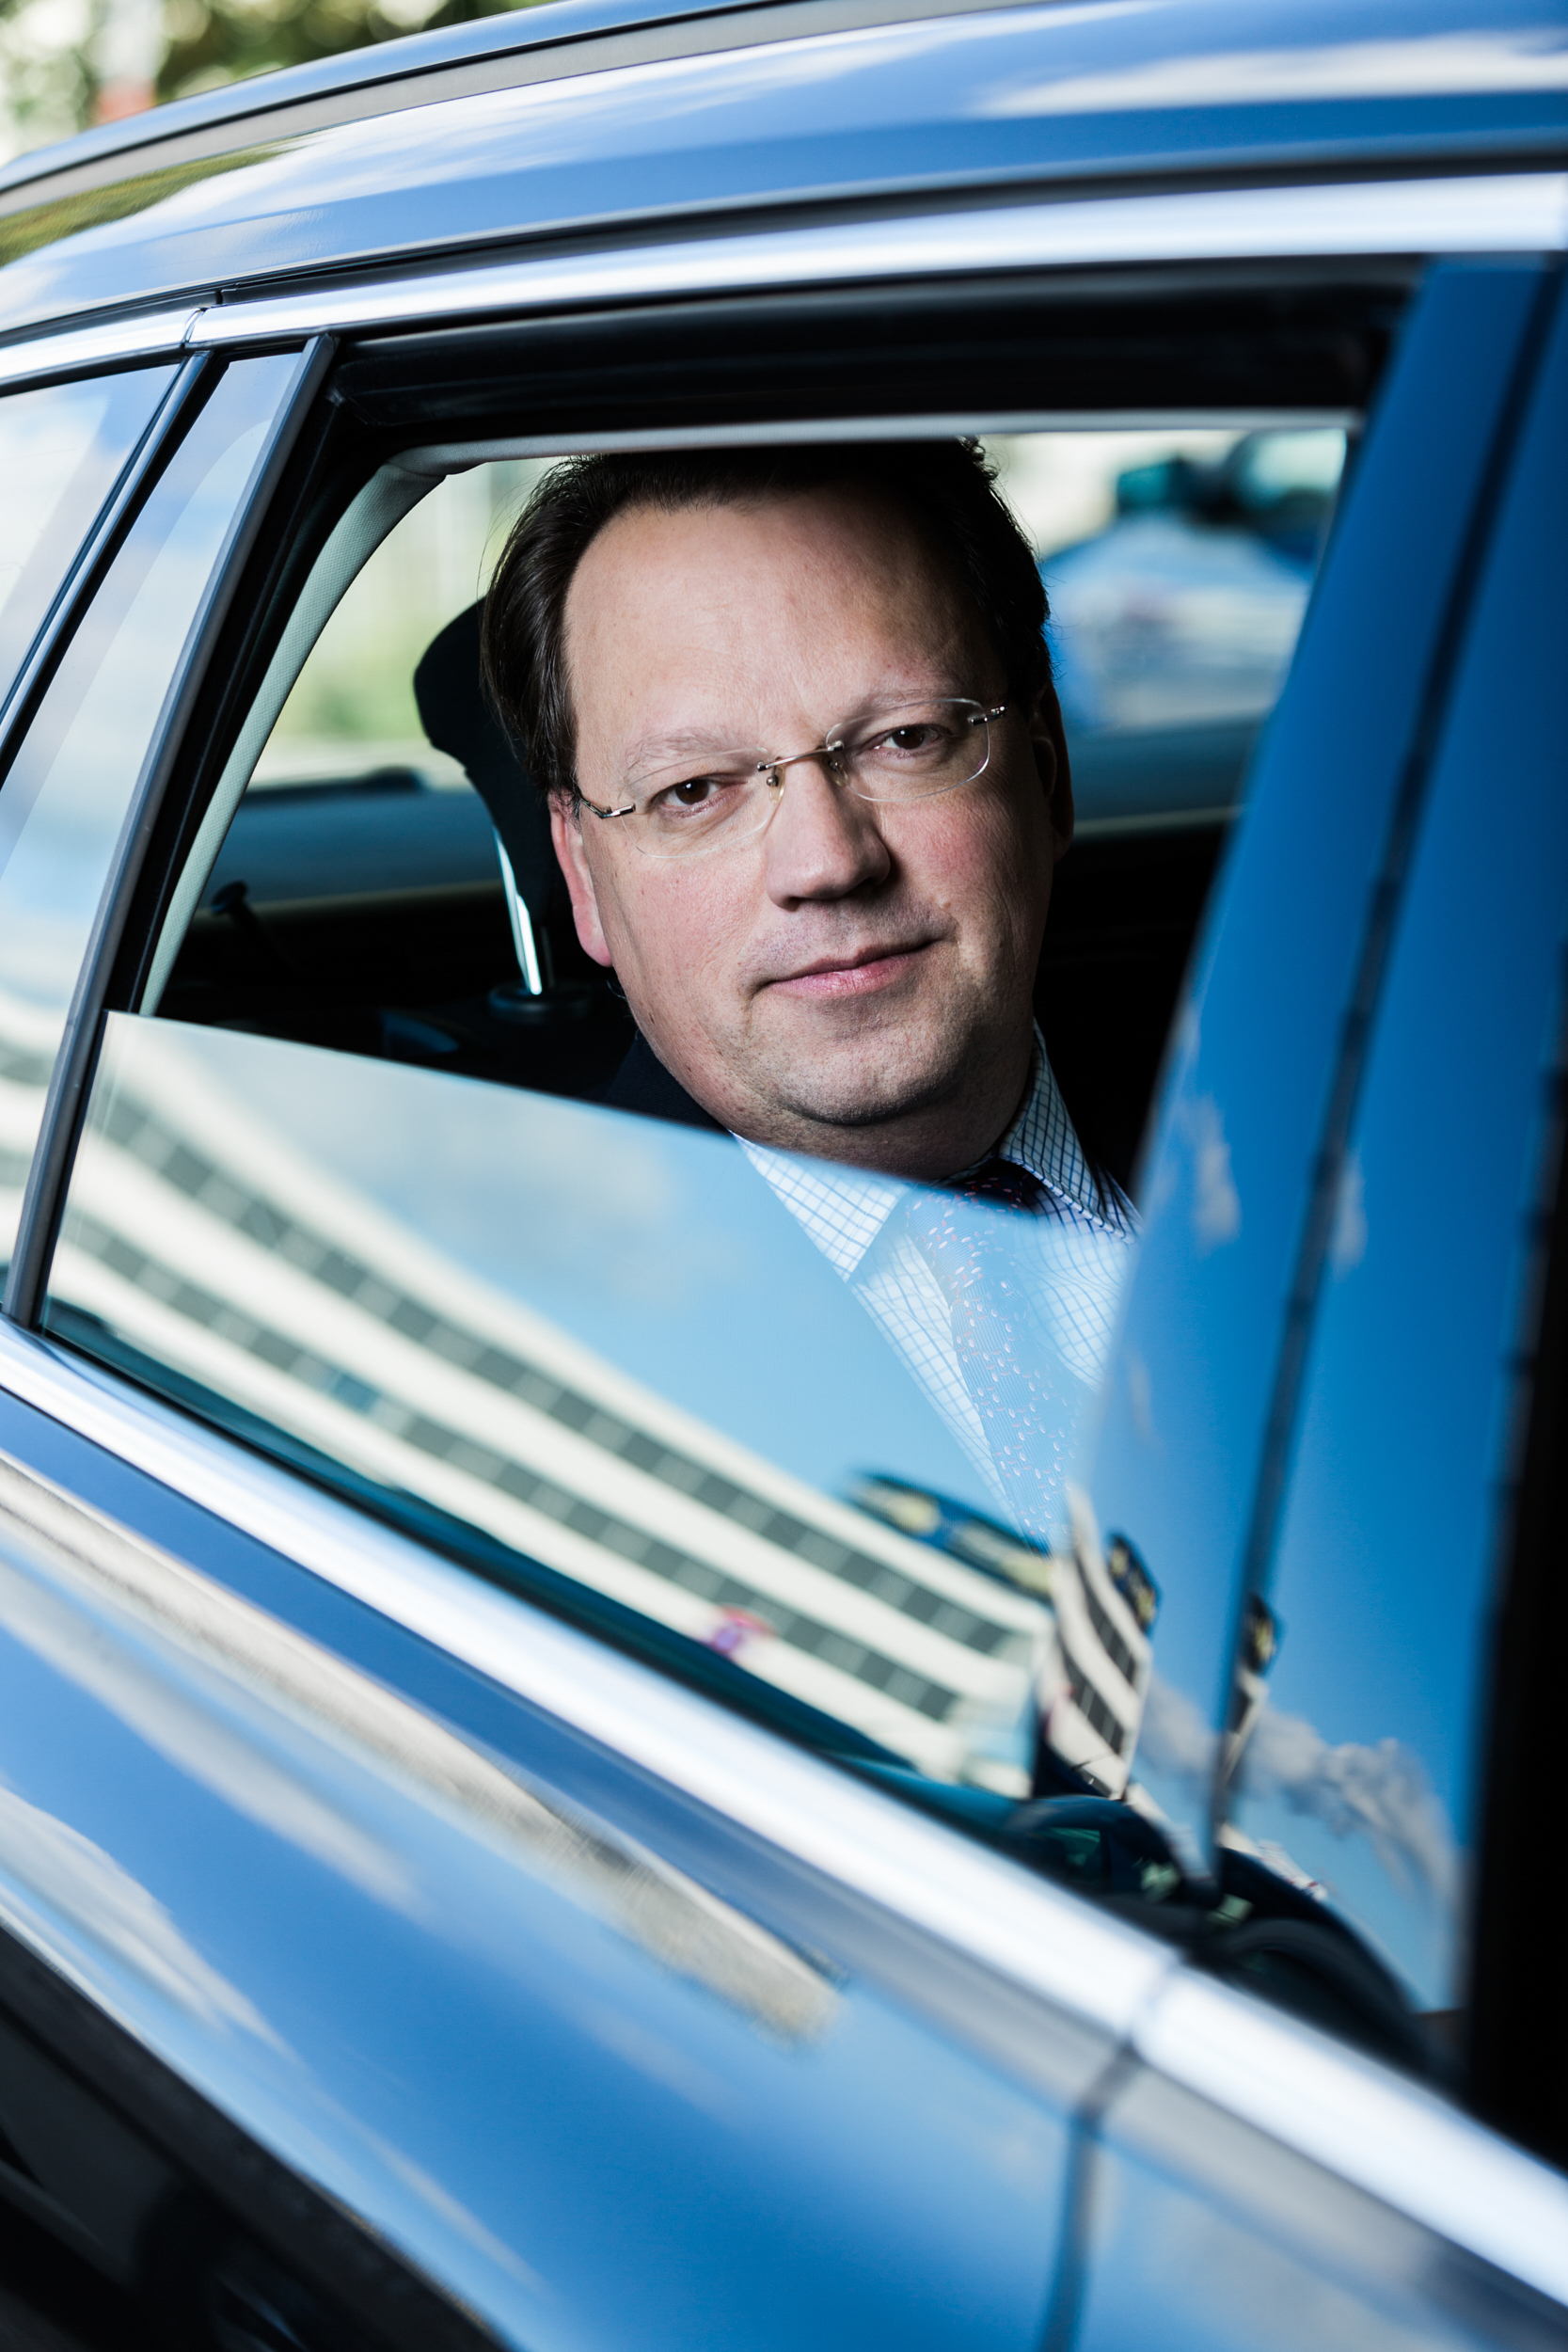 Corporate portrait of a guy in a car